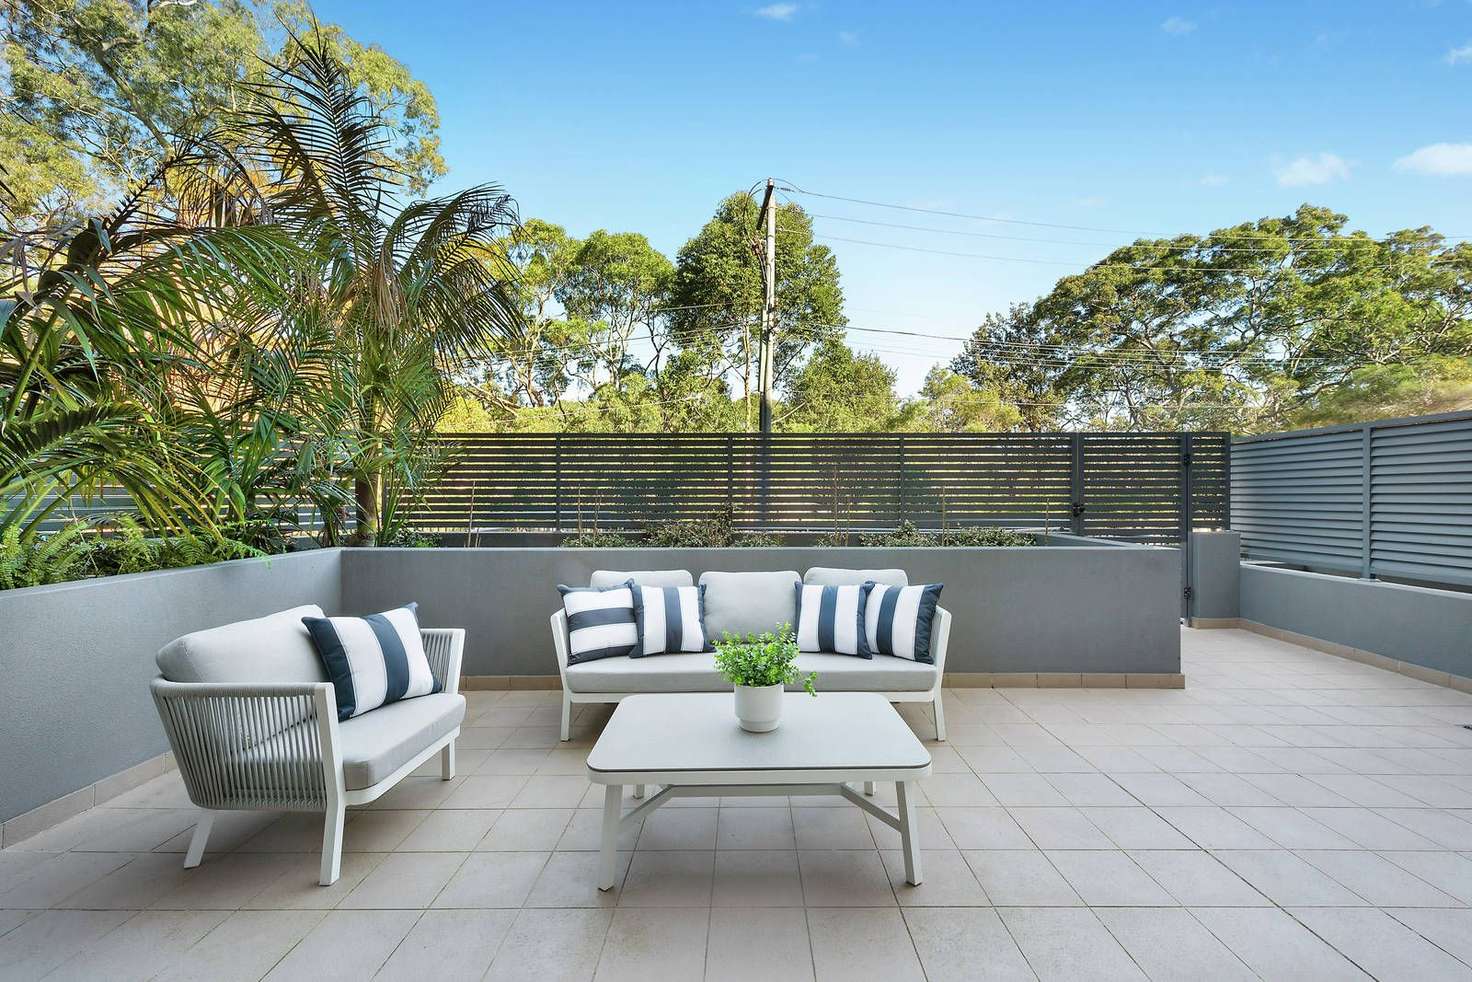 Main view of Homely apartment listing, 2/62-70 Gordon Crescent, Lane Cove NSW 2066